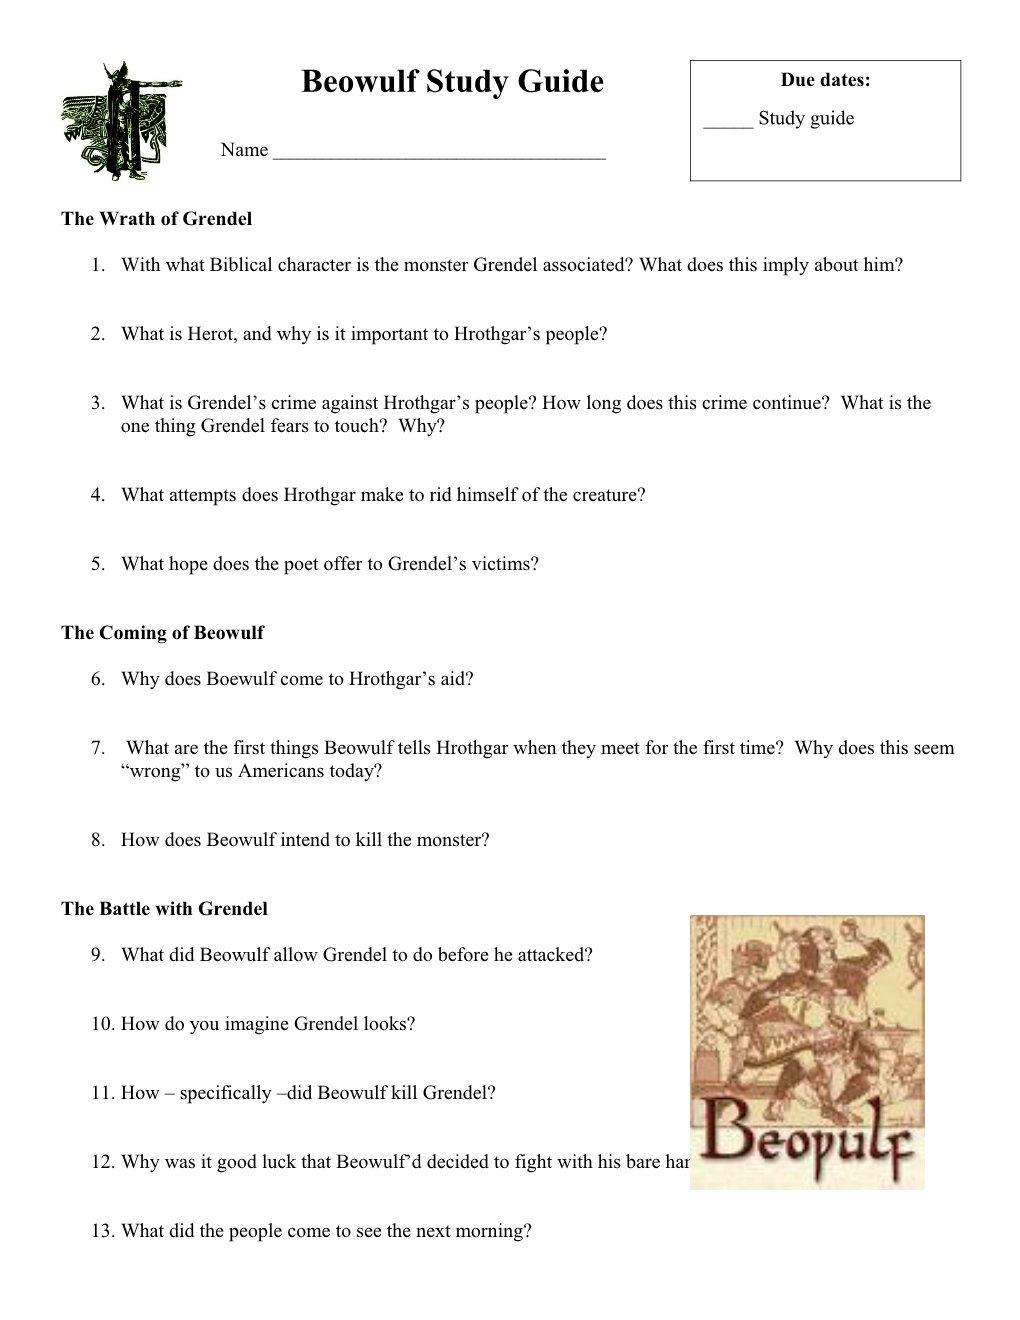 Beowulf Study Guide s1